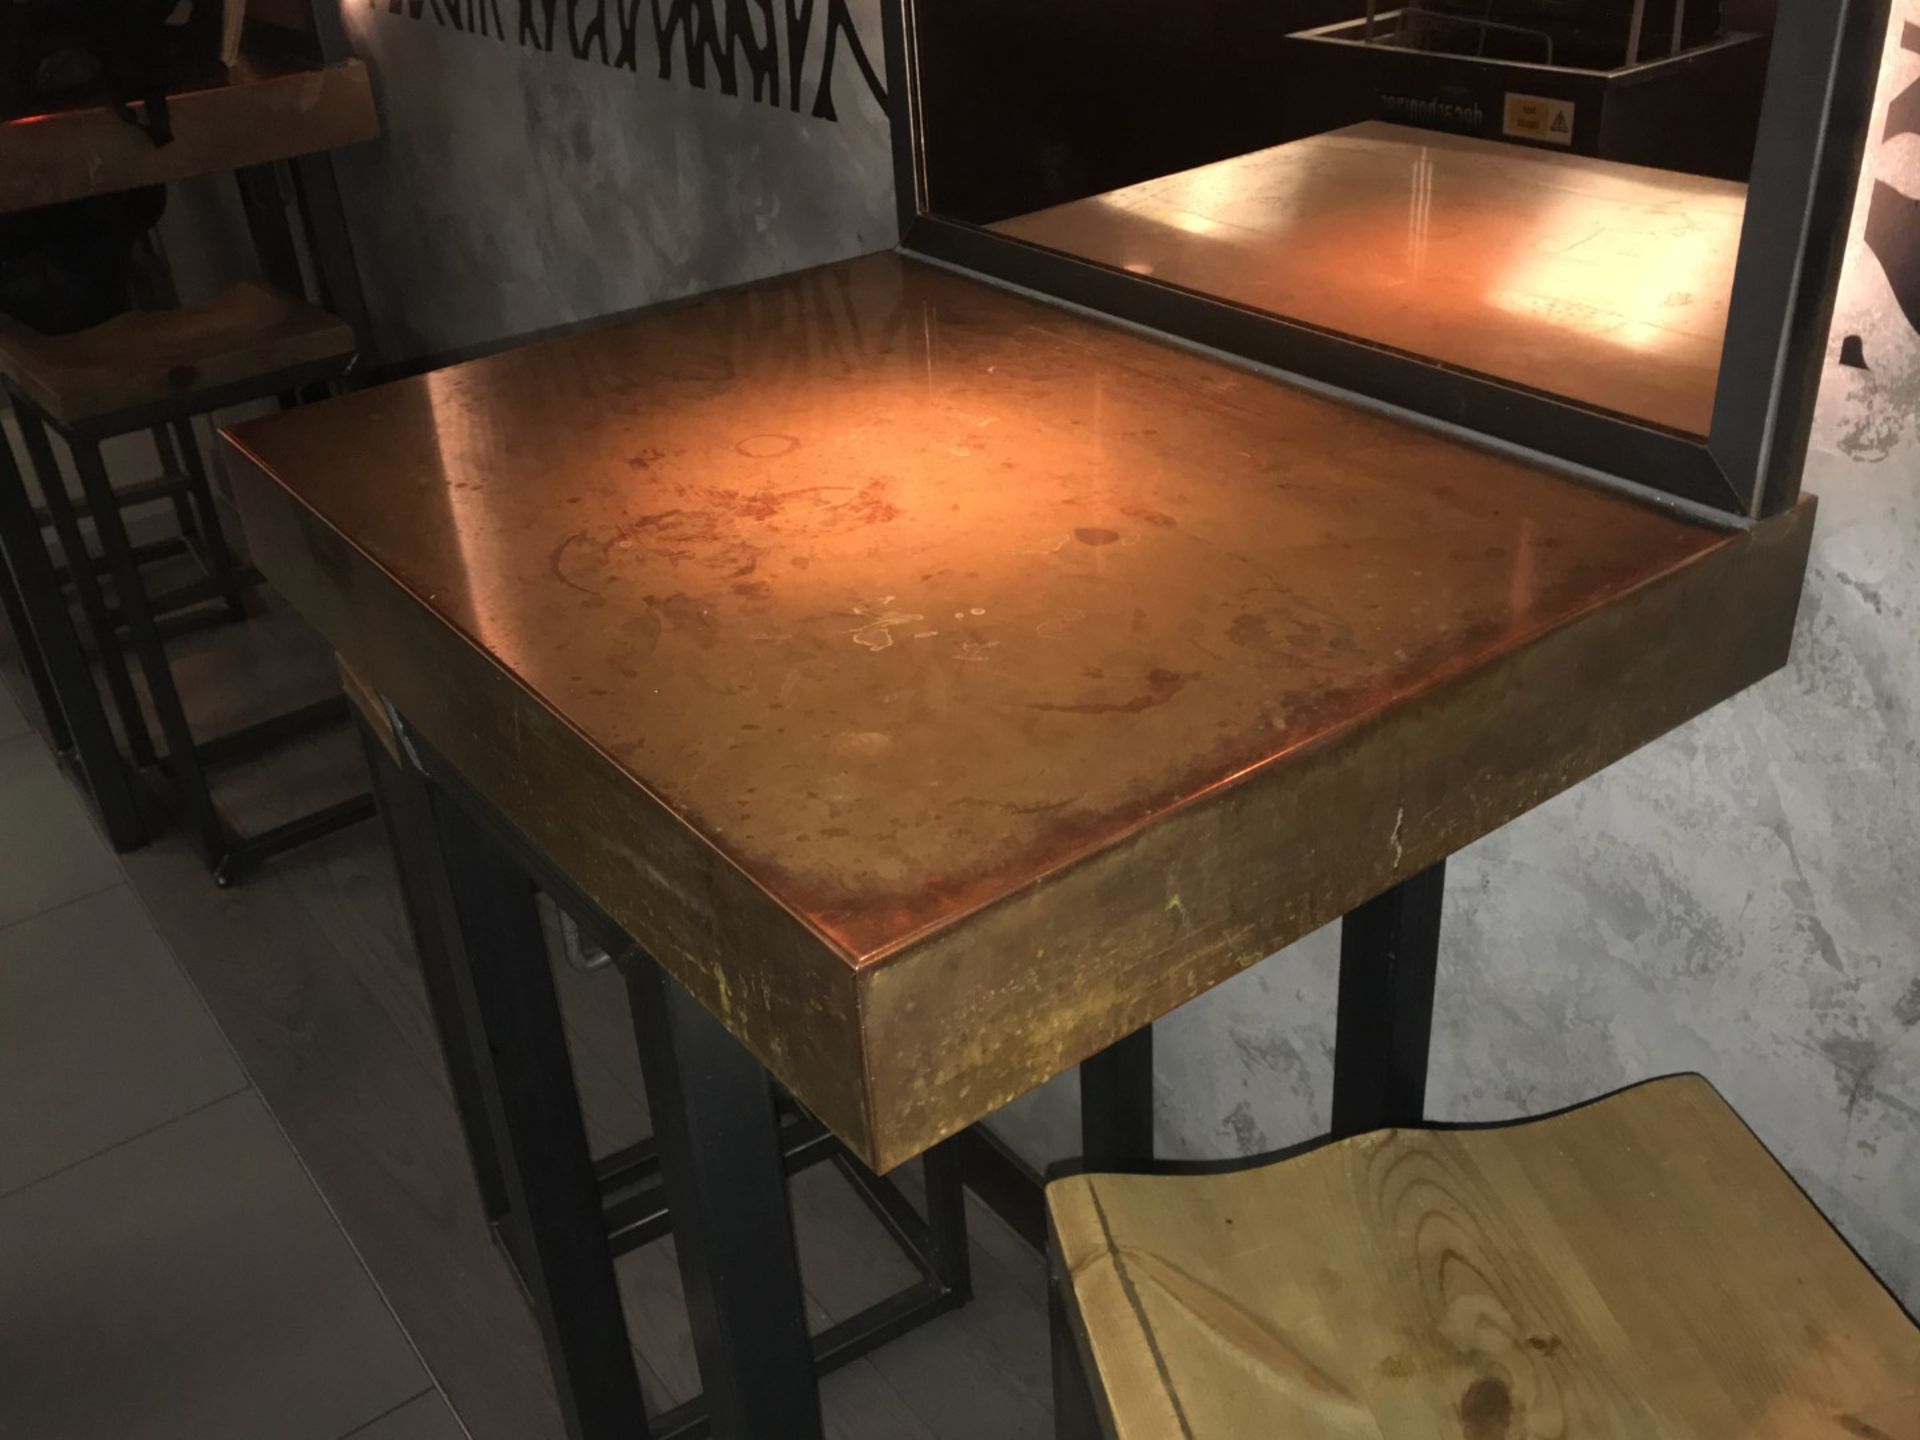 1 x Restaurant Poser Table With Industrail Metal Base and Copper Top - Size H110 x W60 x D75 cms - - Image 5 of 5